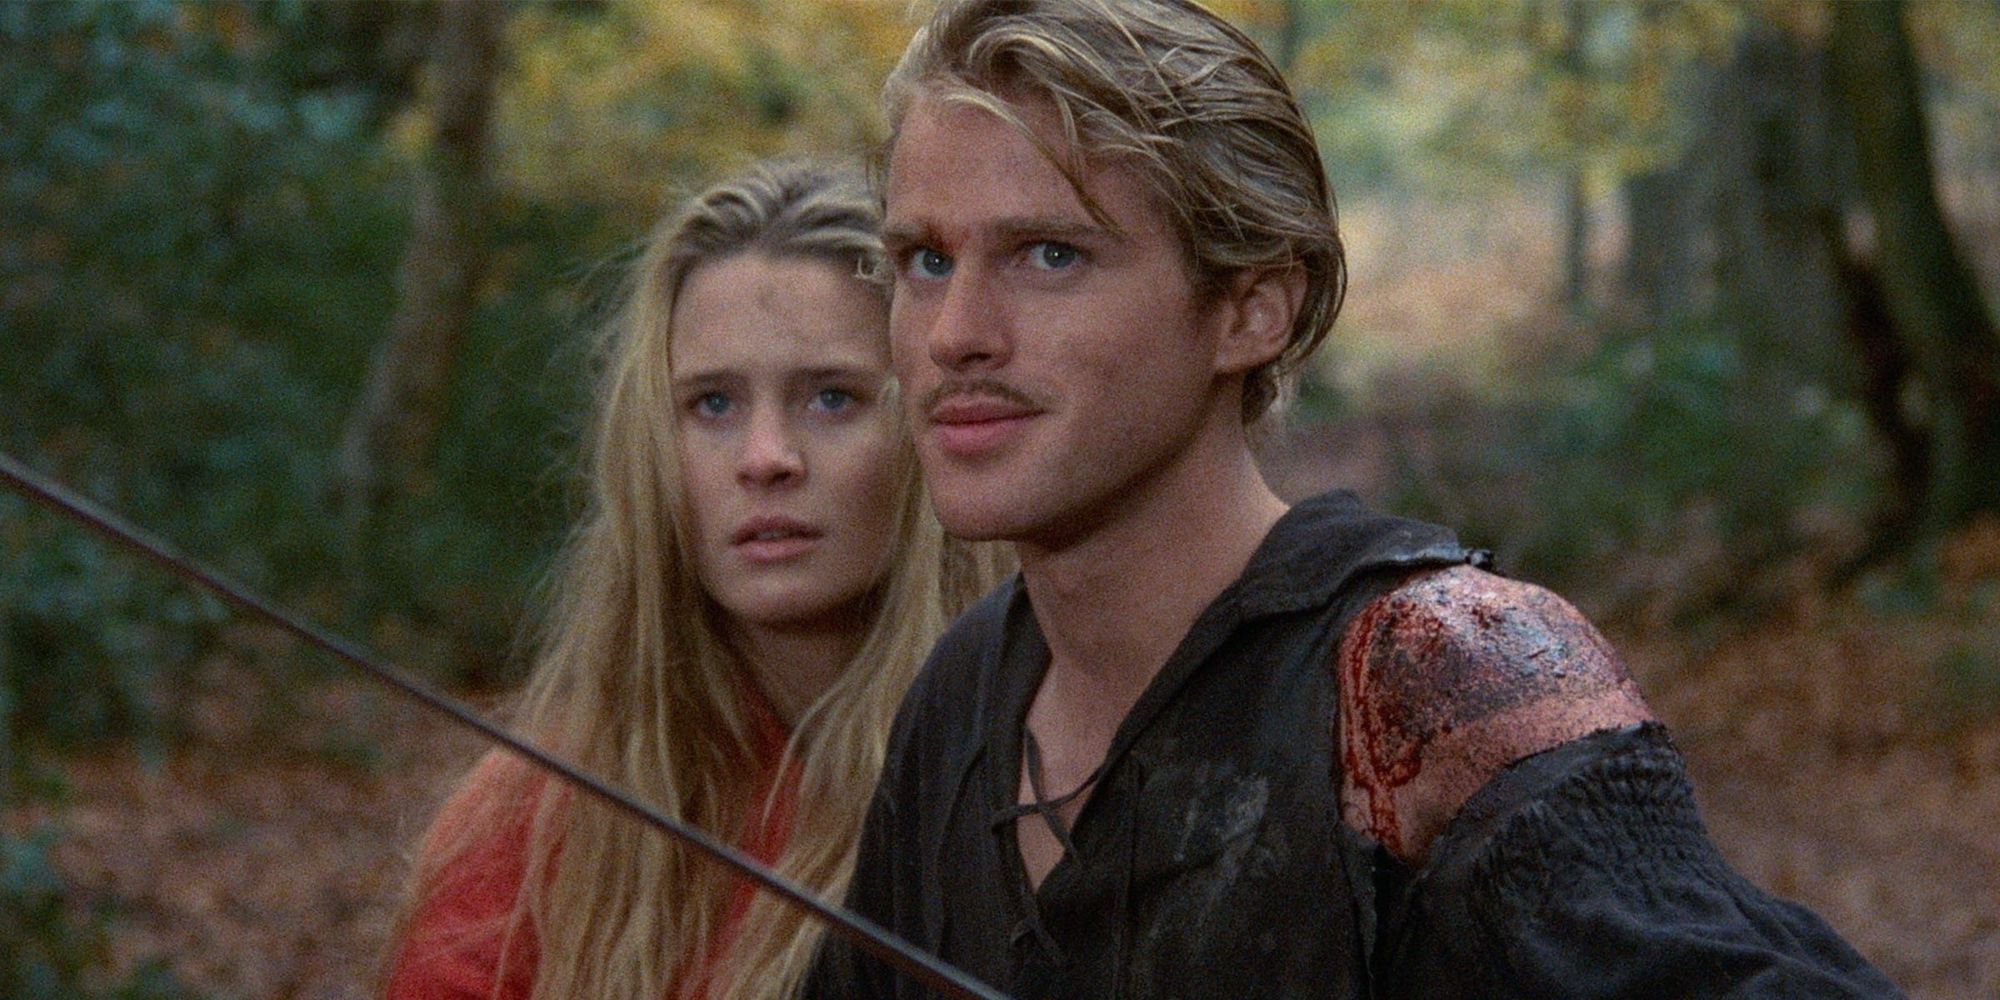 Cary Elwes as Westley and Robin Wright as Buttercup in The Princess Bride